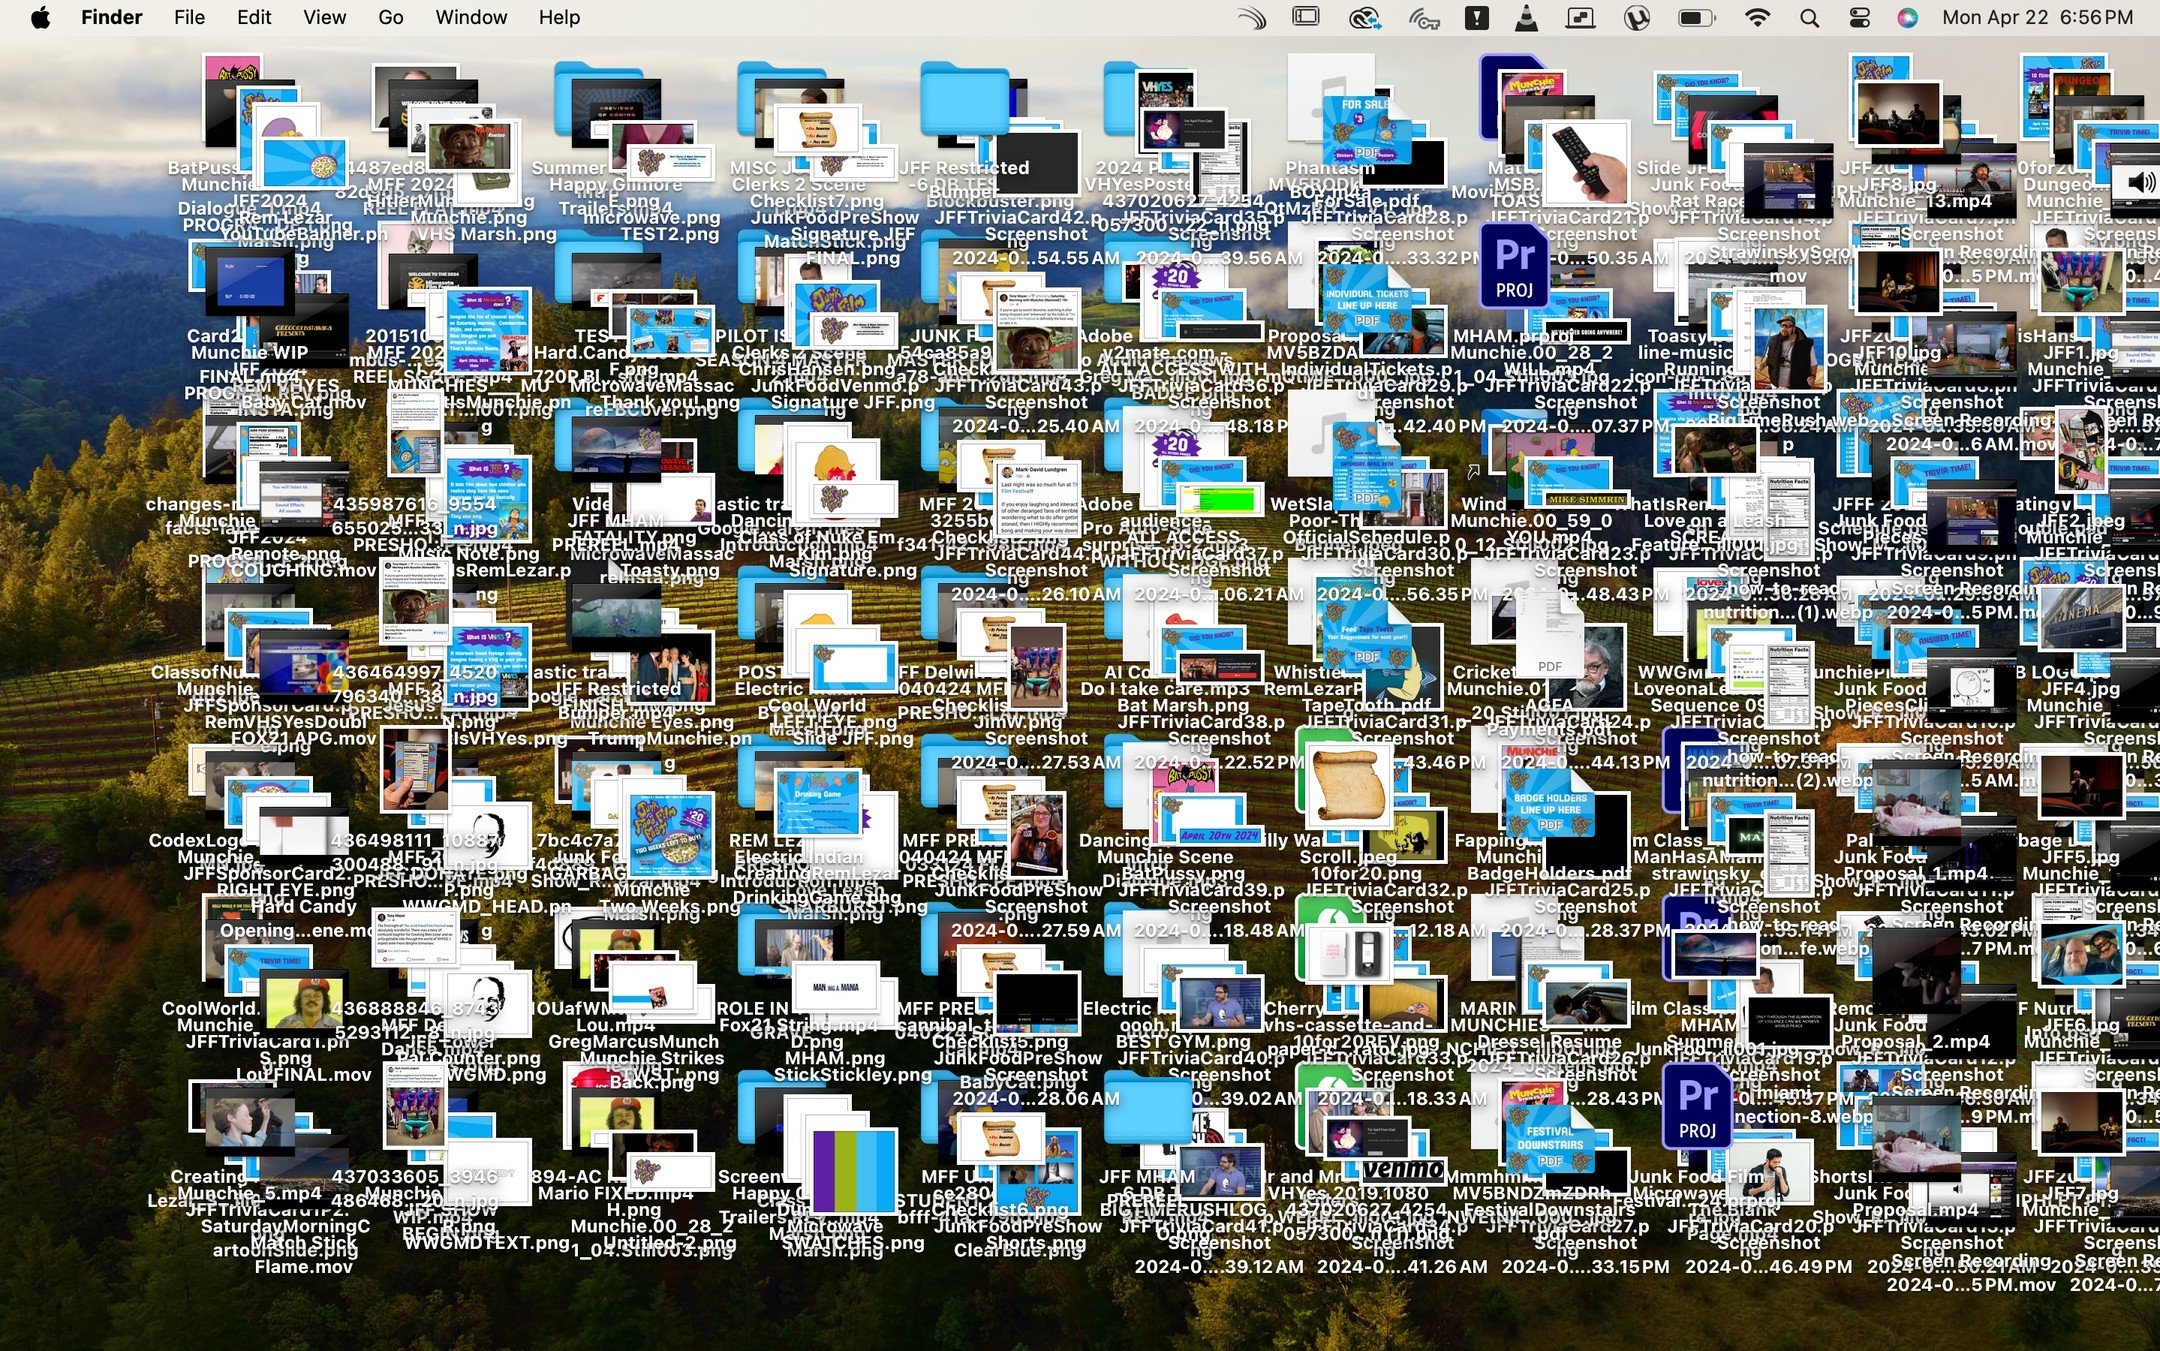 Now that the festival is over I can finally clean my desktop.

&quot;Your desktop is giving me anxiety.&quot; - Marin